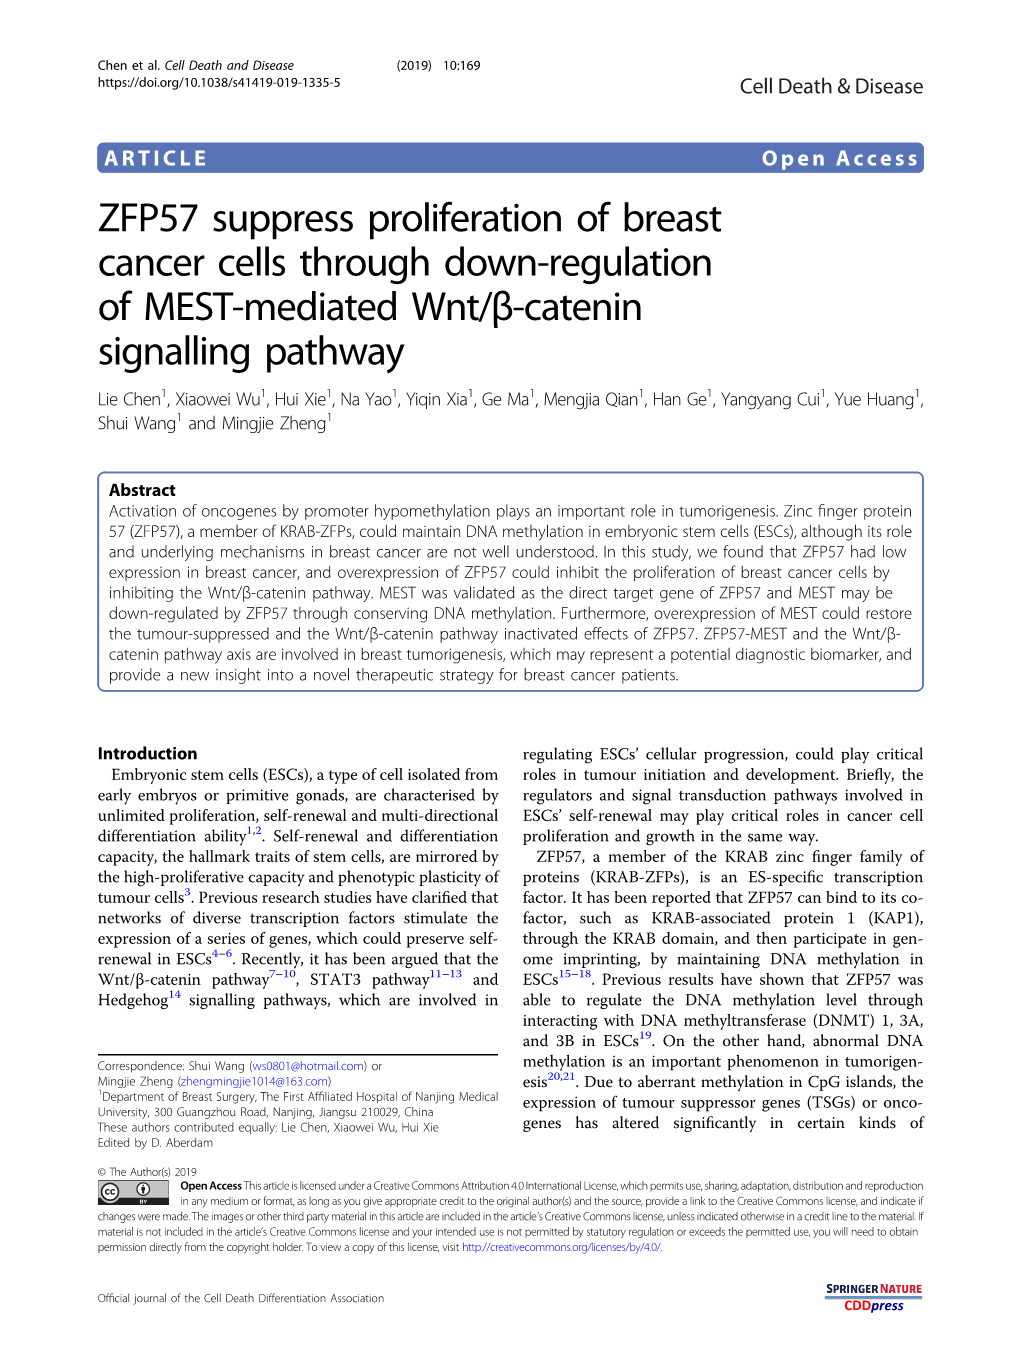 ZFP57 Suppress Proliferation of Breast Cancer Cells Through Down